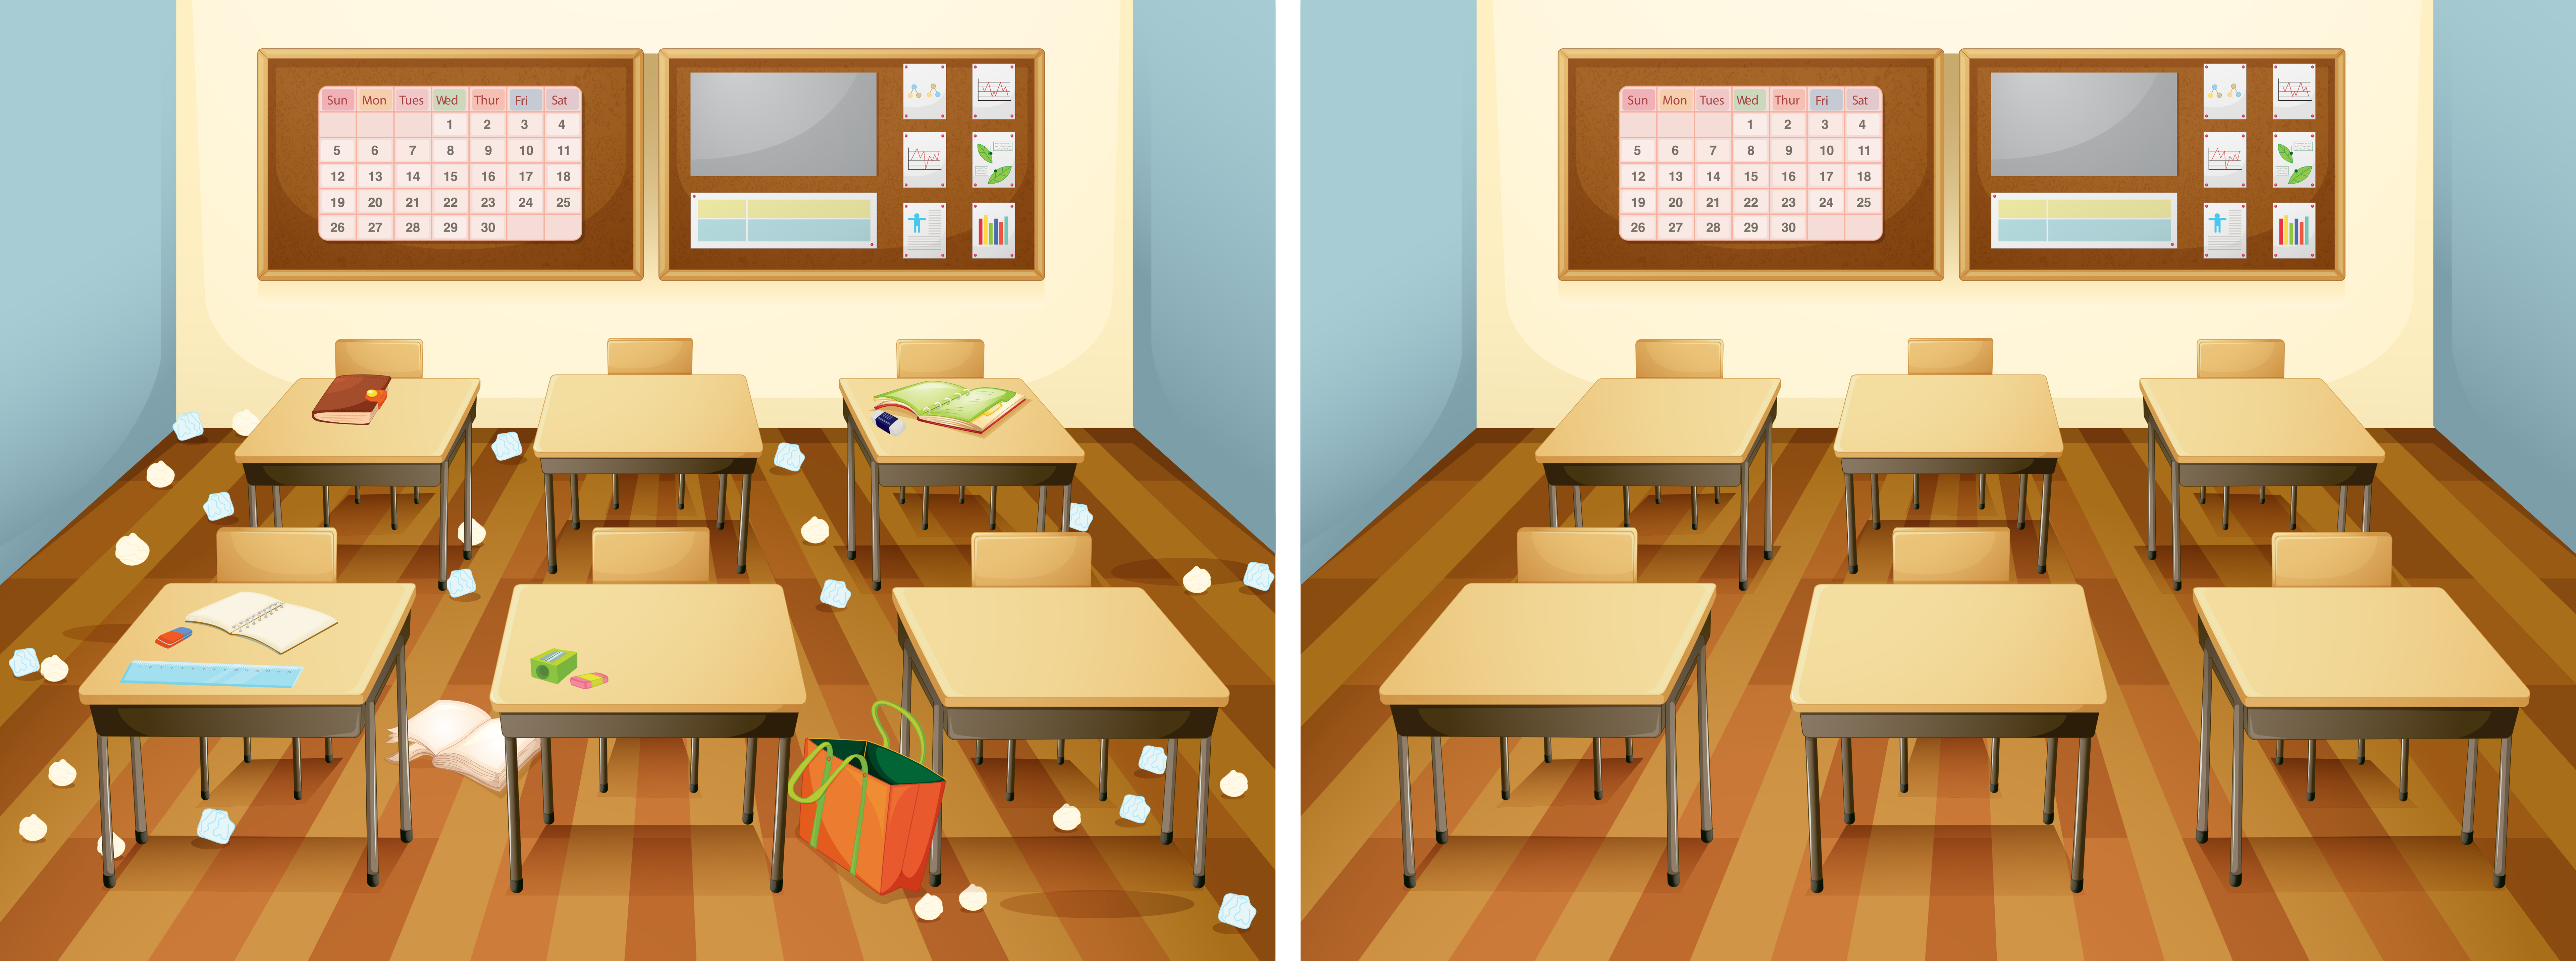 A Classroom Before And After Clean 444439 Download Free Vectors